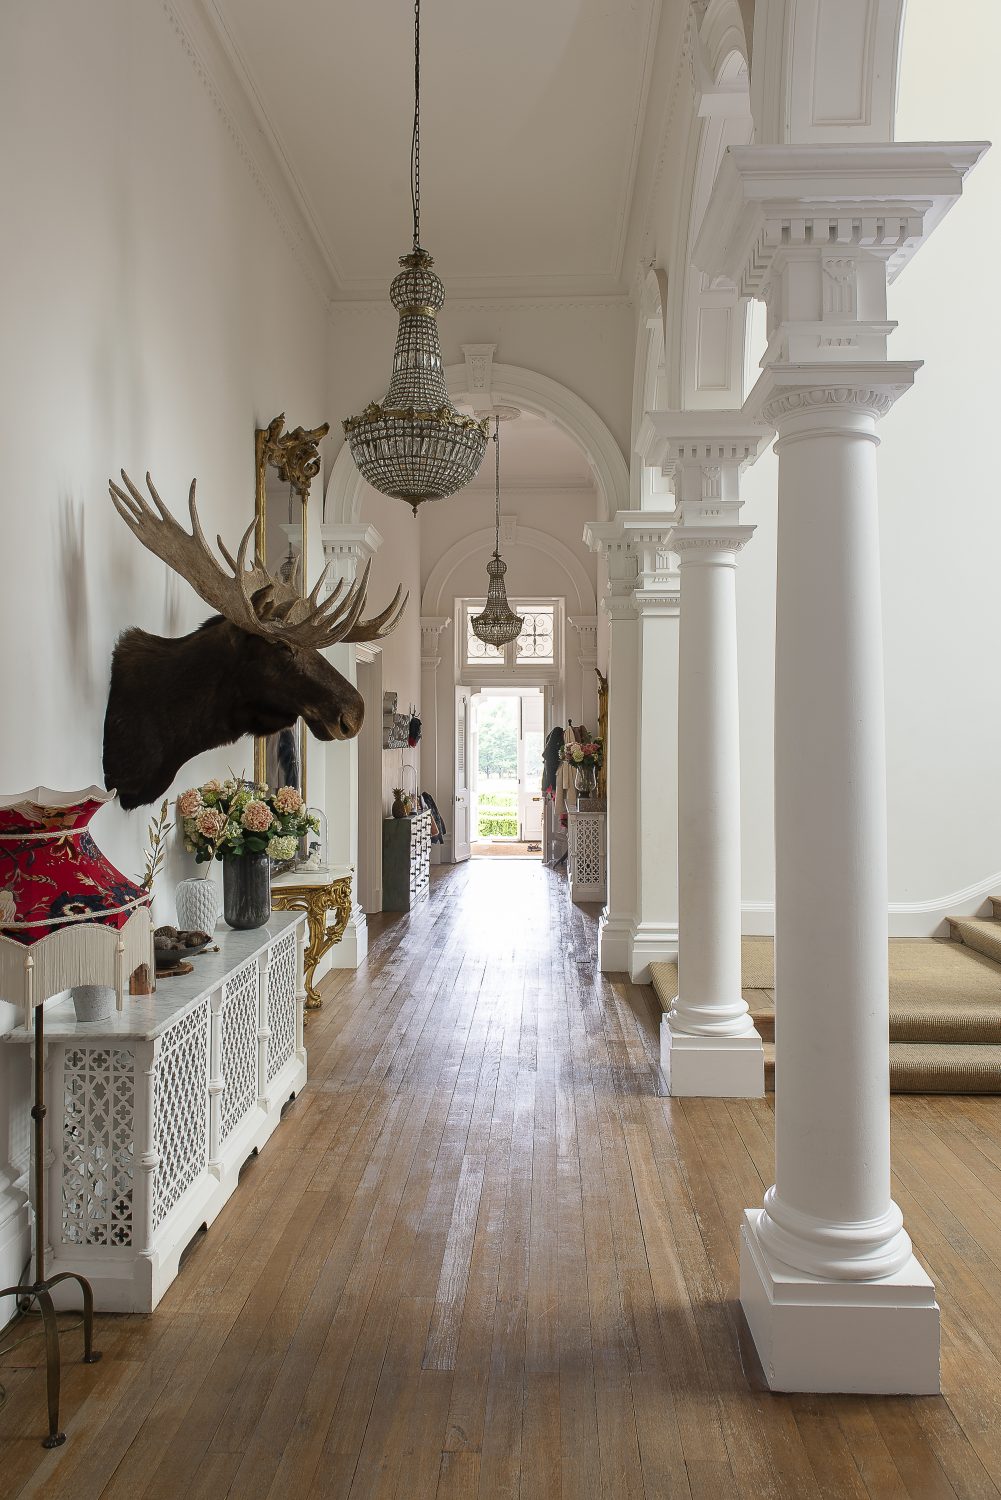 Jaime’s colour palette of neutral whites and greys has allowed Bayham Hall’s original features to shine through